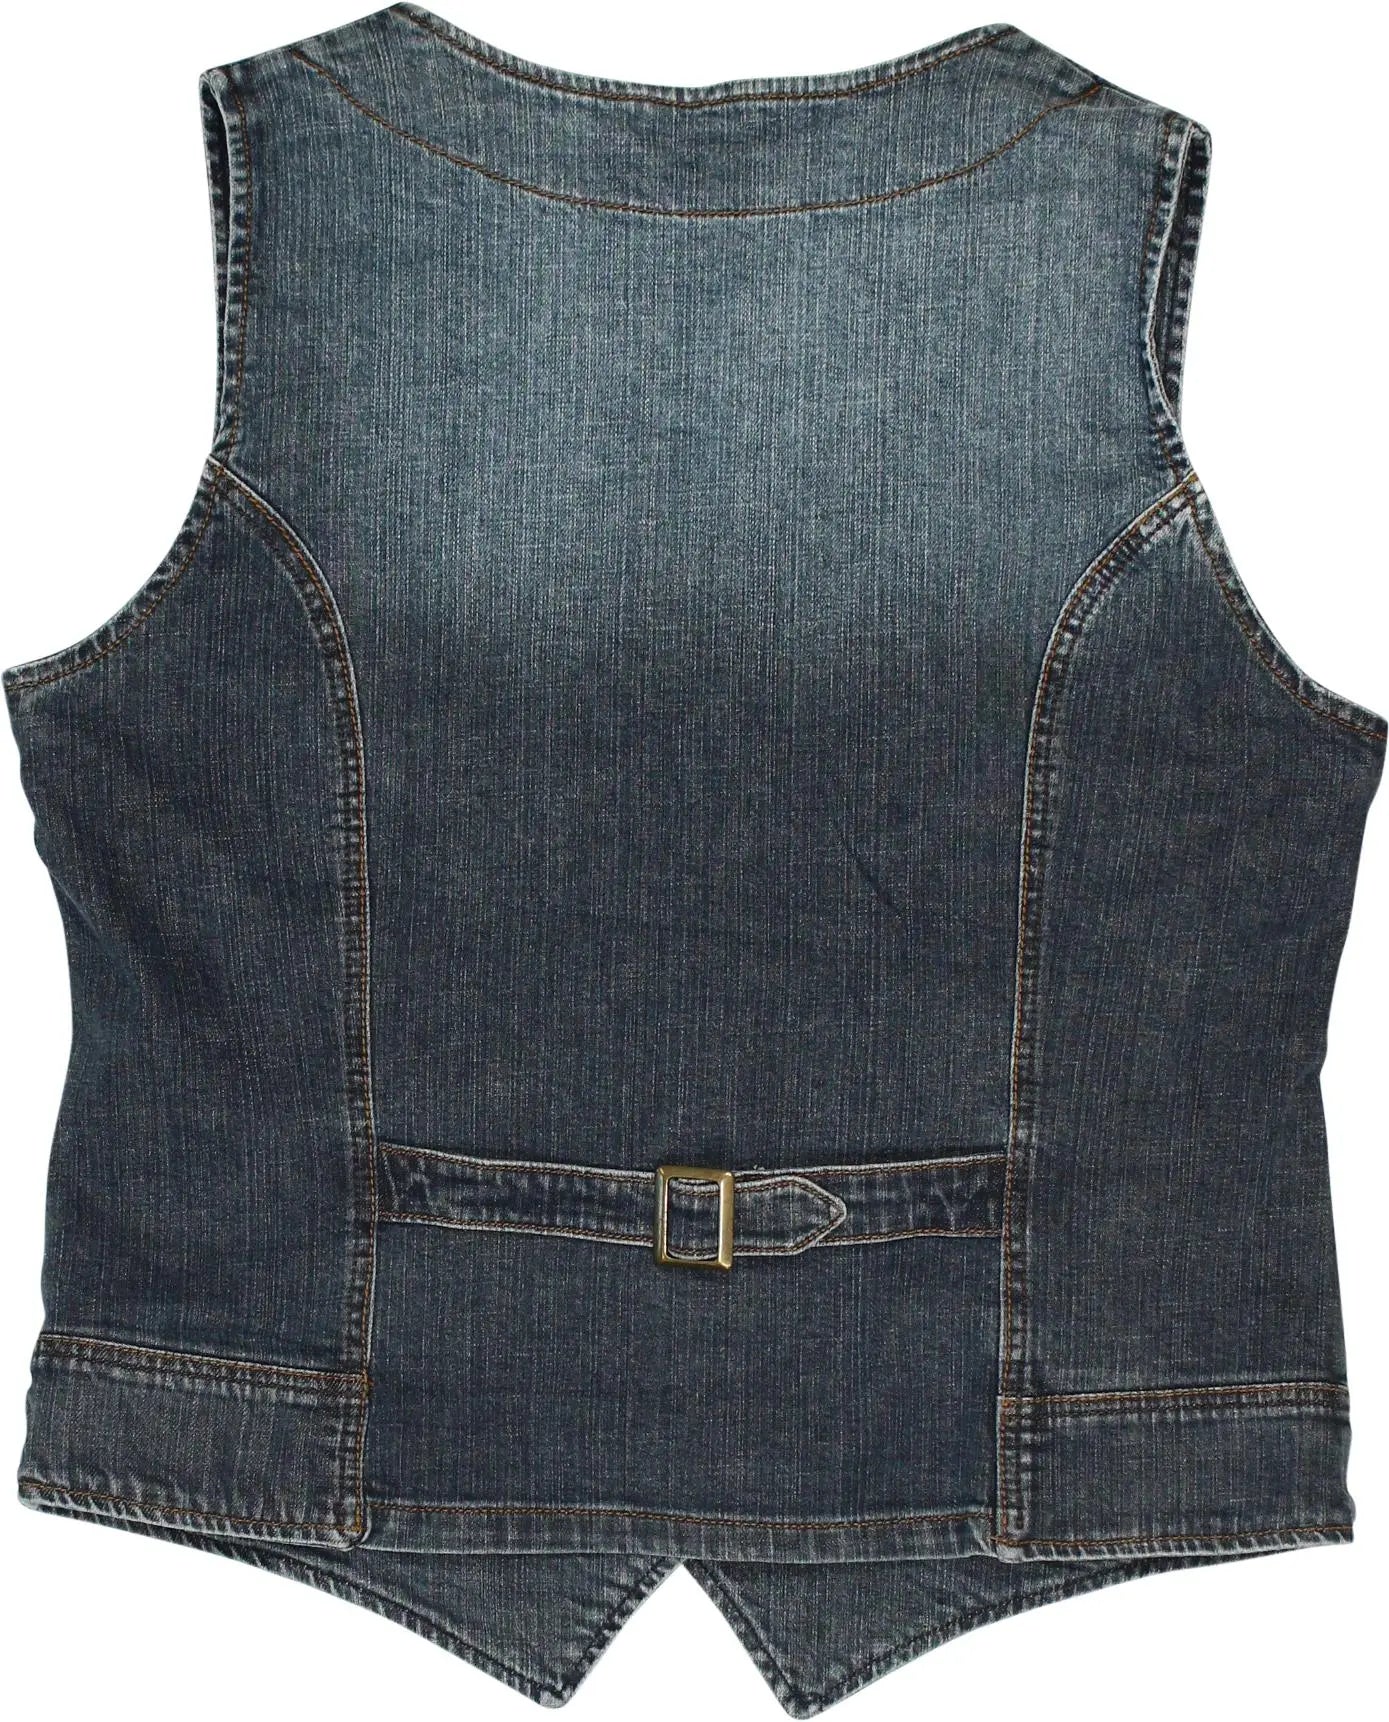 Dreamstar - Denim Waistcoat- ThriftTale.com - Vintage and second handclothing